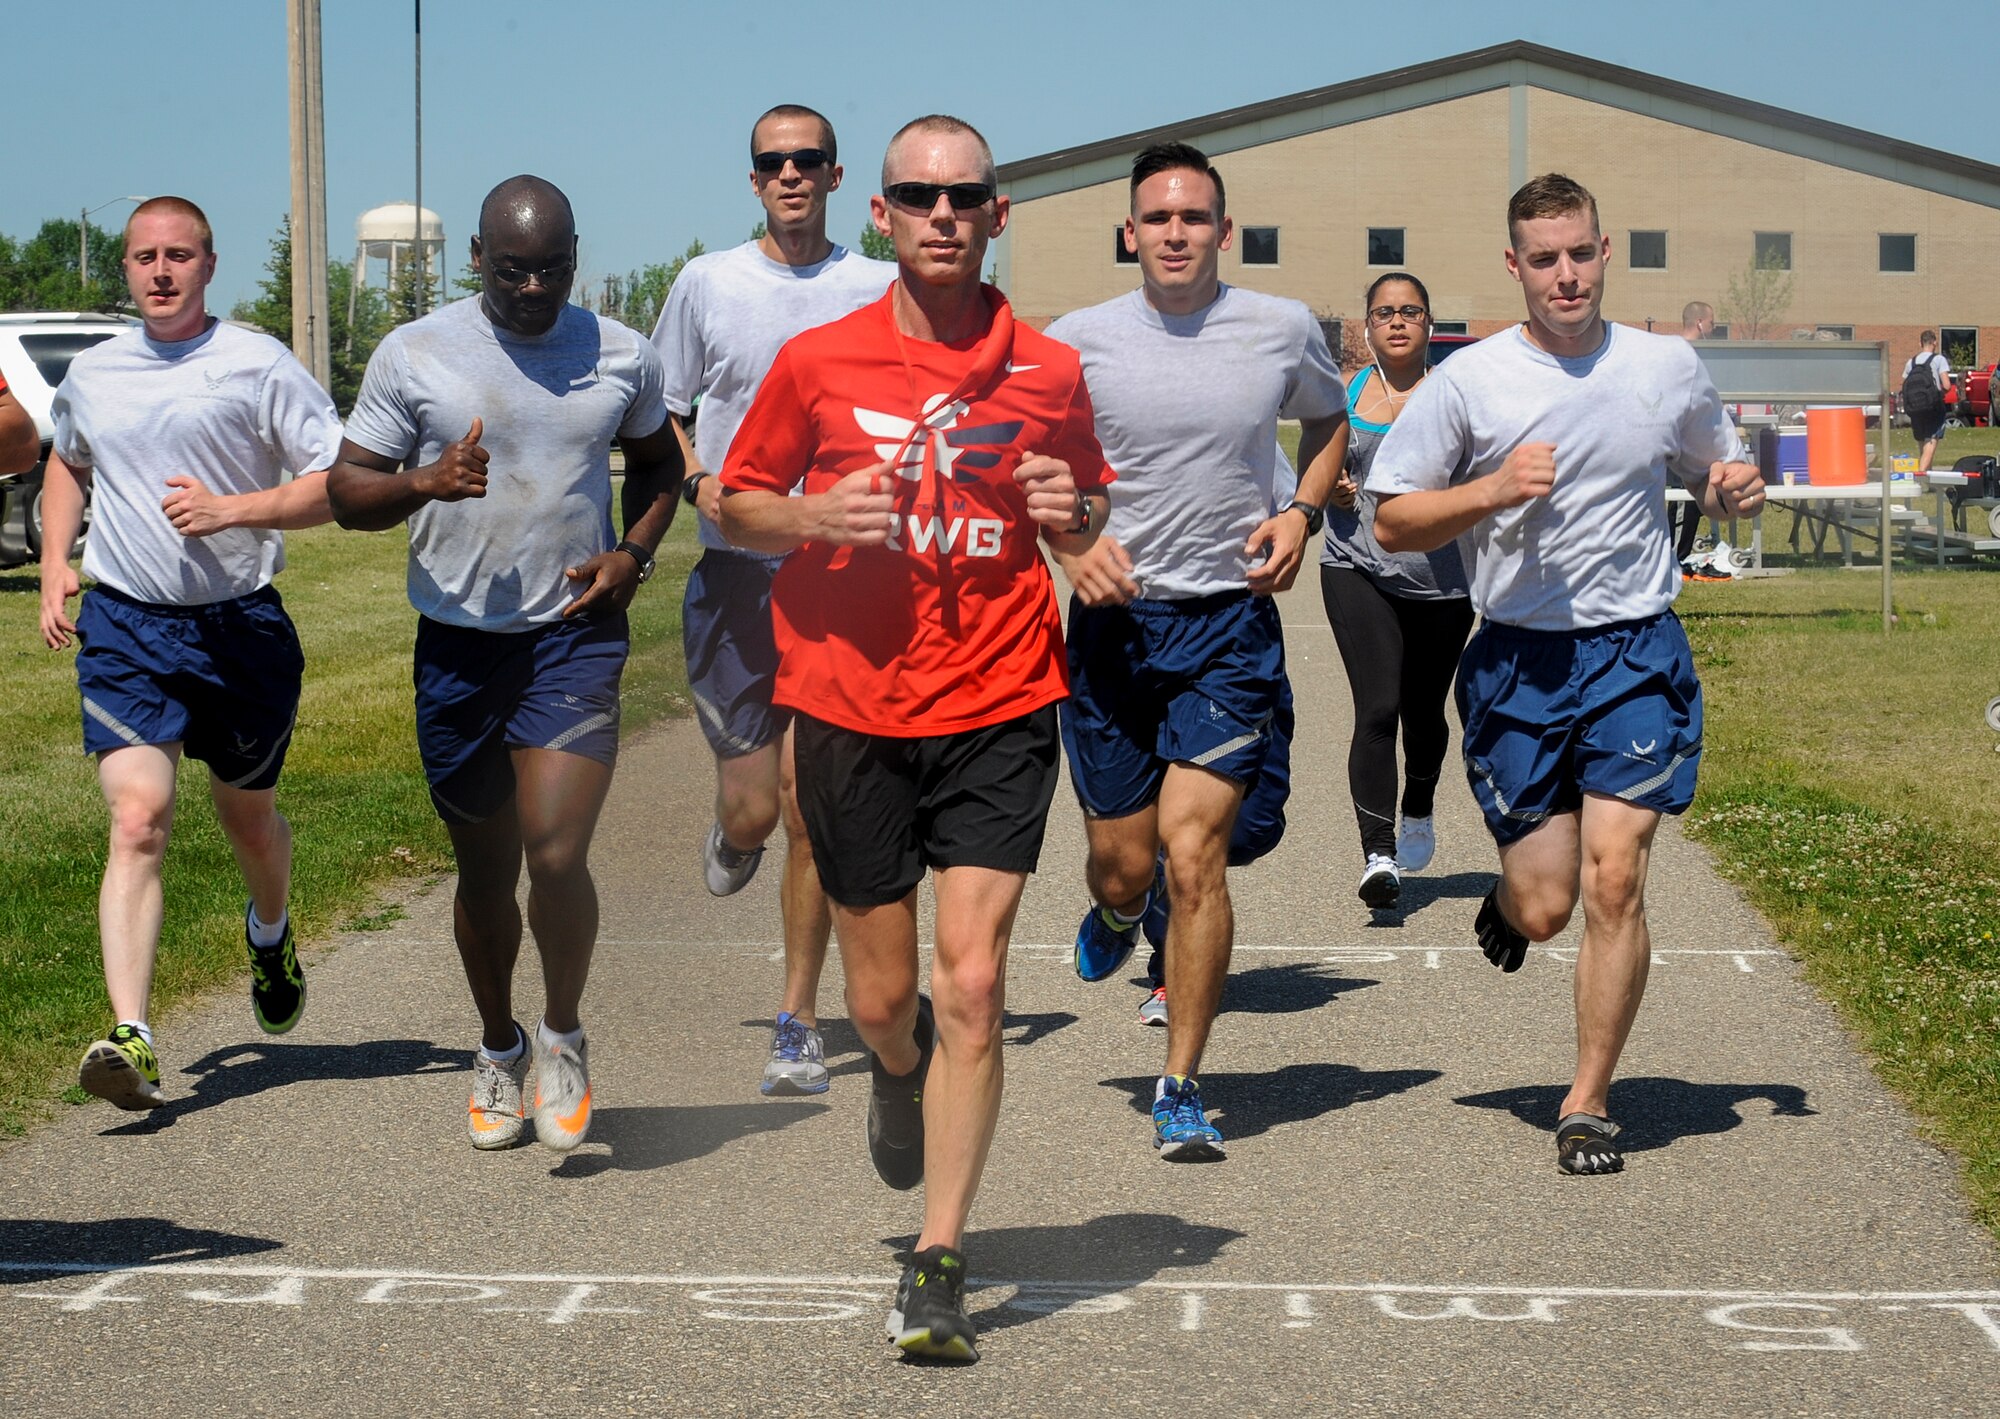 Chief Master Sgt. Geoff Weimer, 5th Bomb Wing command chief, leads a group of Airmen on the 50th mile of a 52 mile run at Minot Air Force Base, N.D., July 24, 2015. To prepare for the event, Weimer made distance adjustments to his regular running routine and factored in fatigue and physical stress. (U.S. Air Force photo/Senior Airman Stephanie Morris)